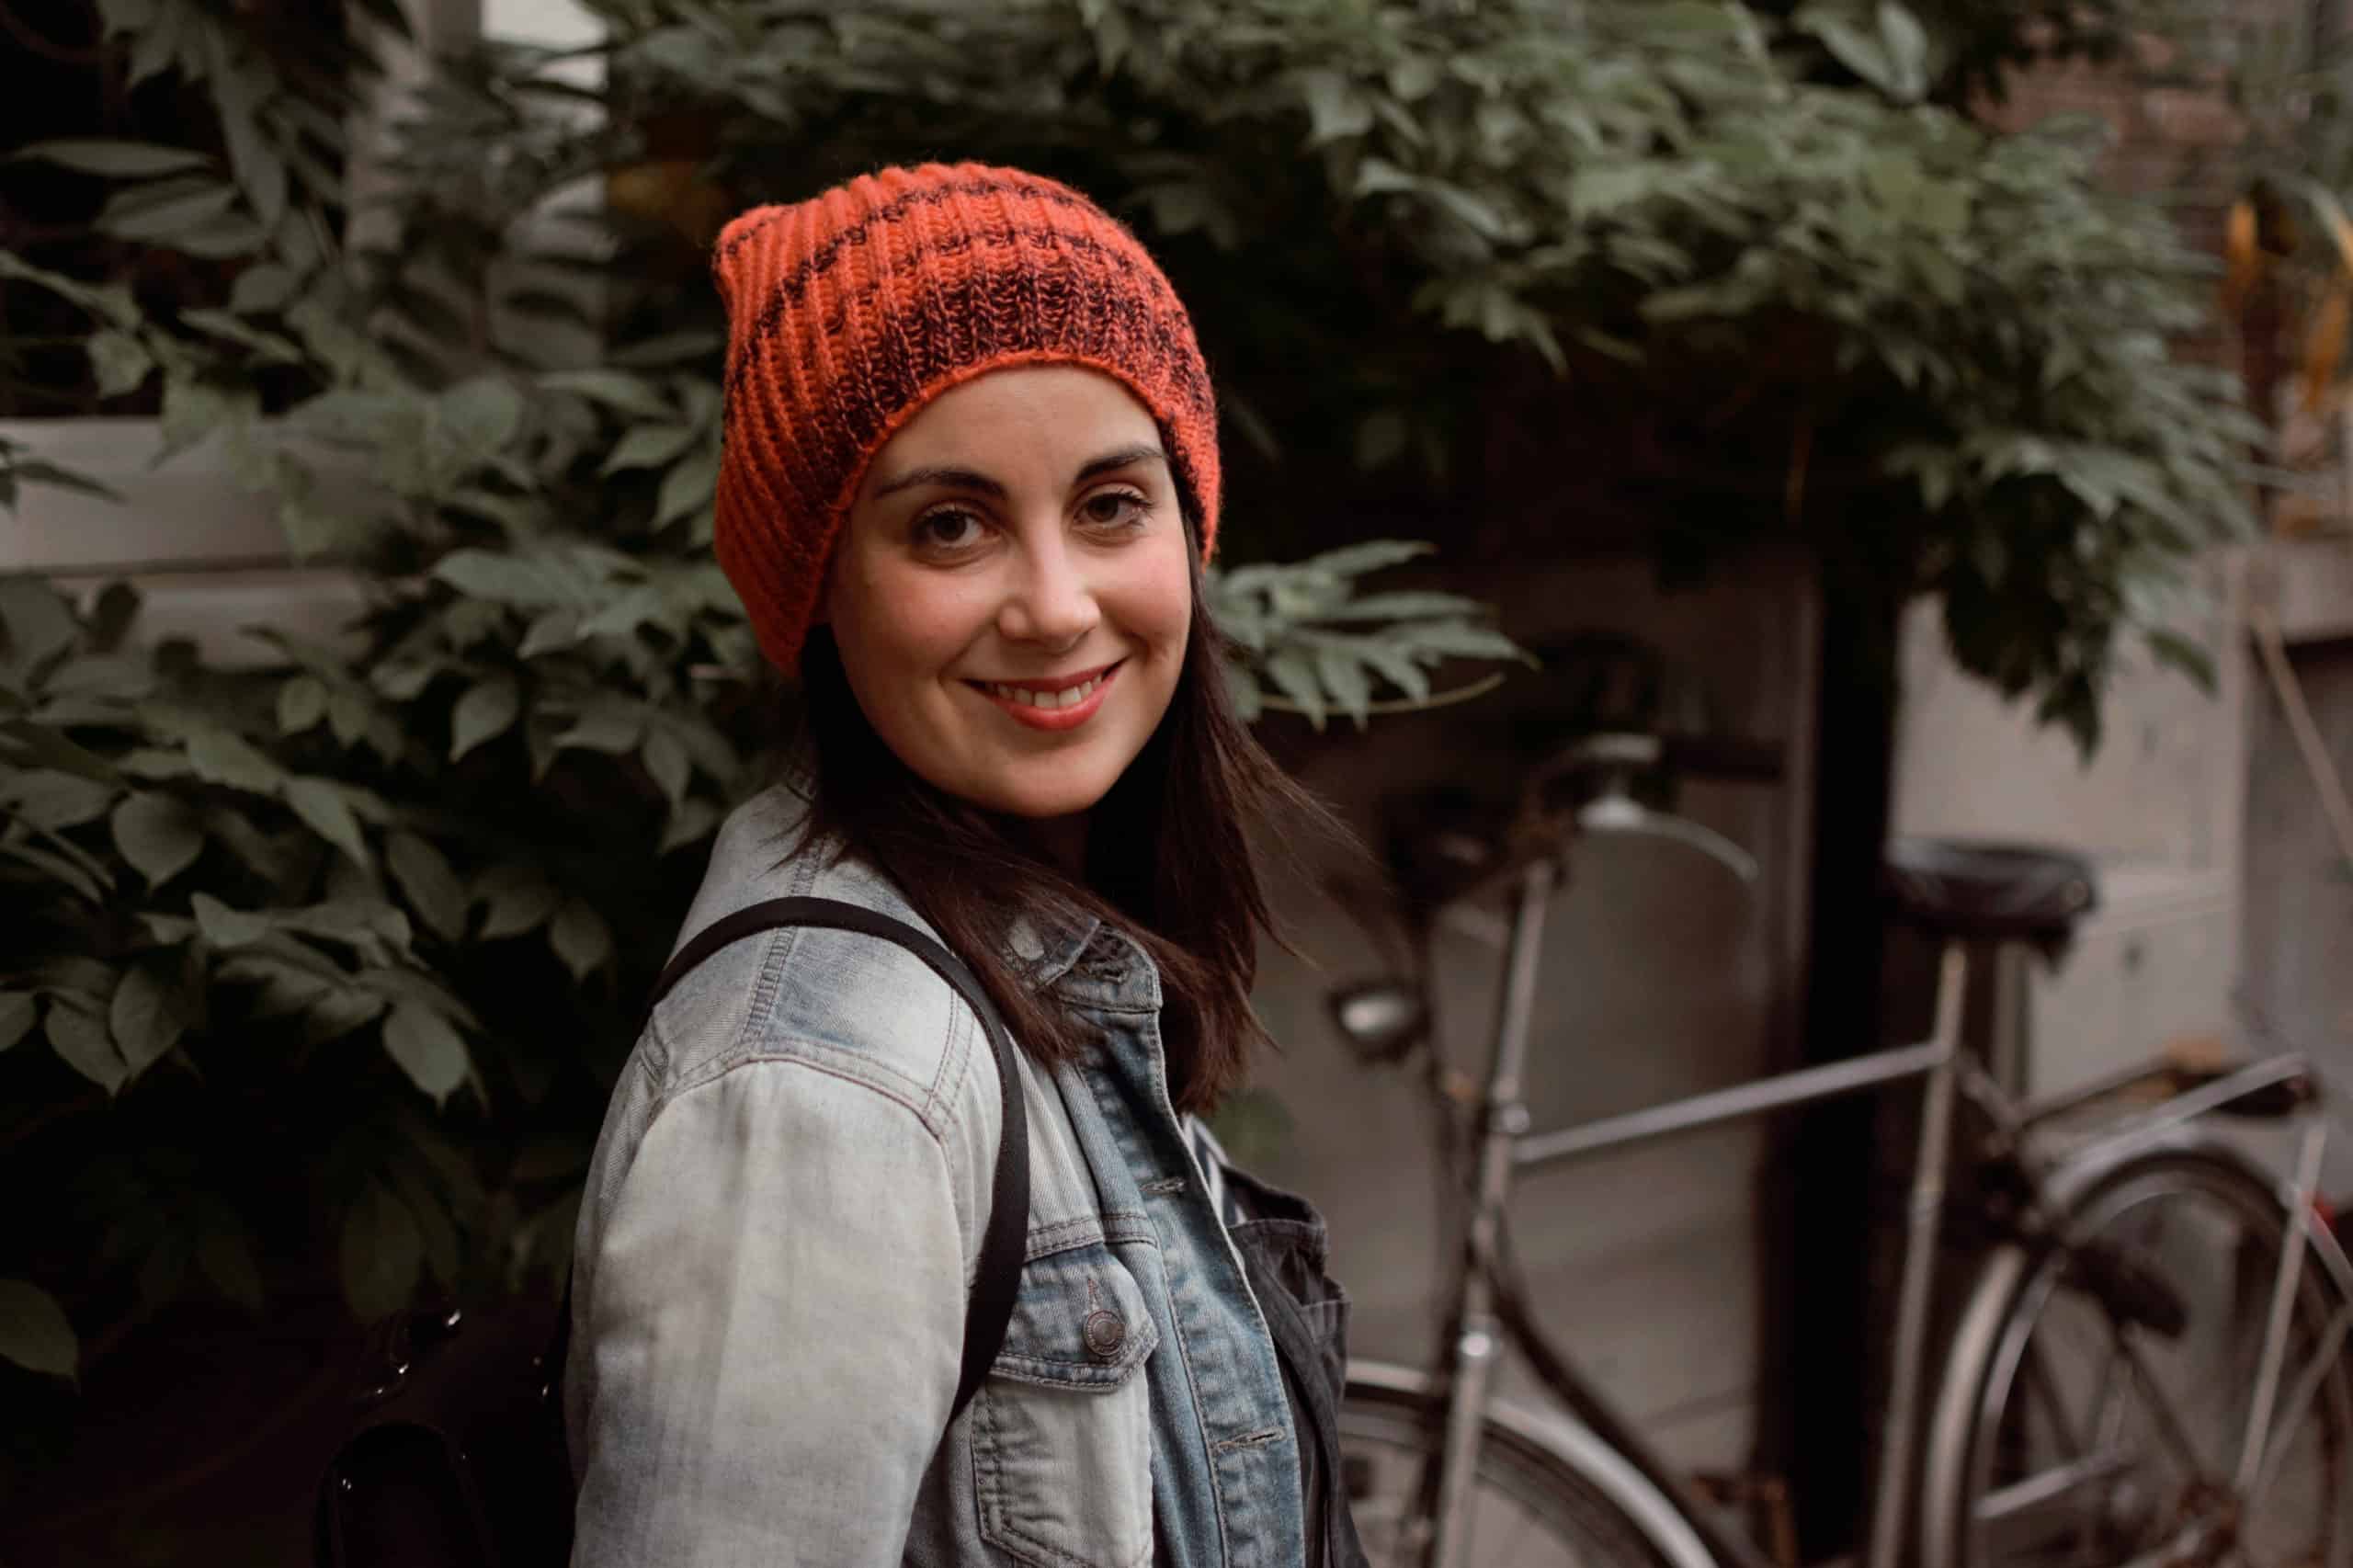 A woman in a red knit beanie smiles at the camera.